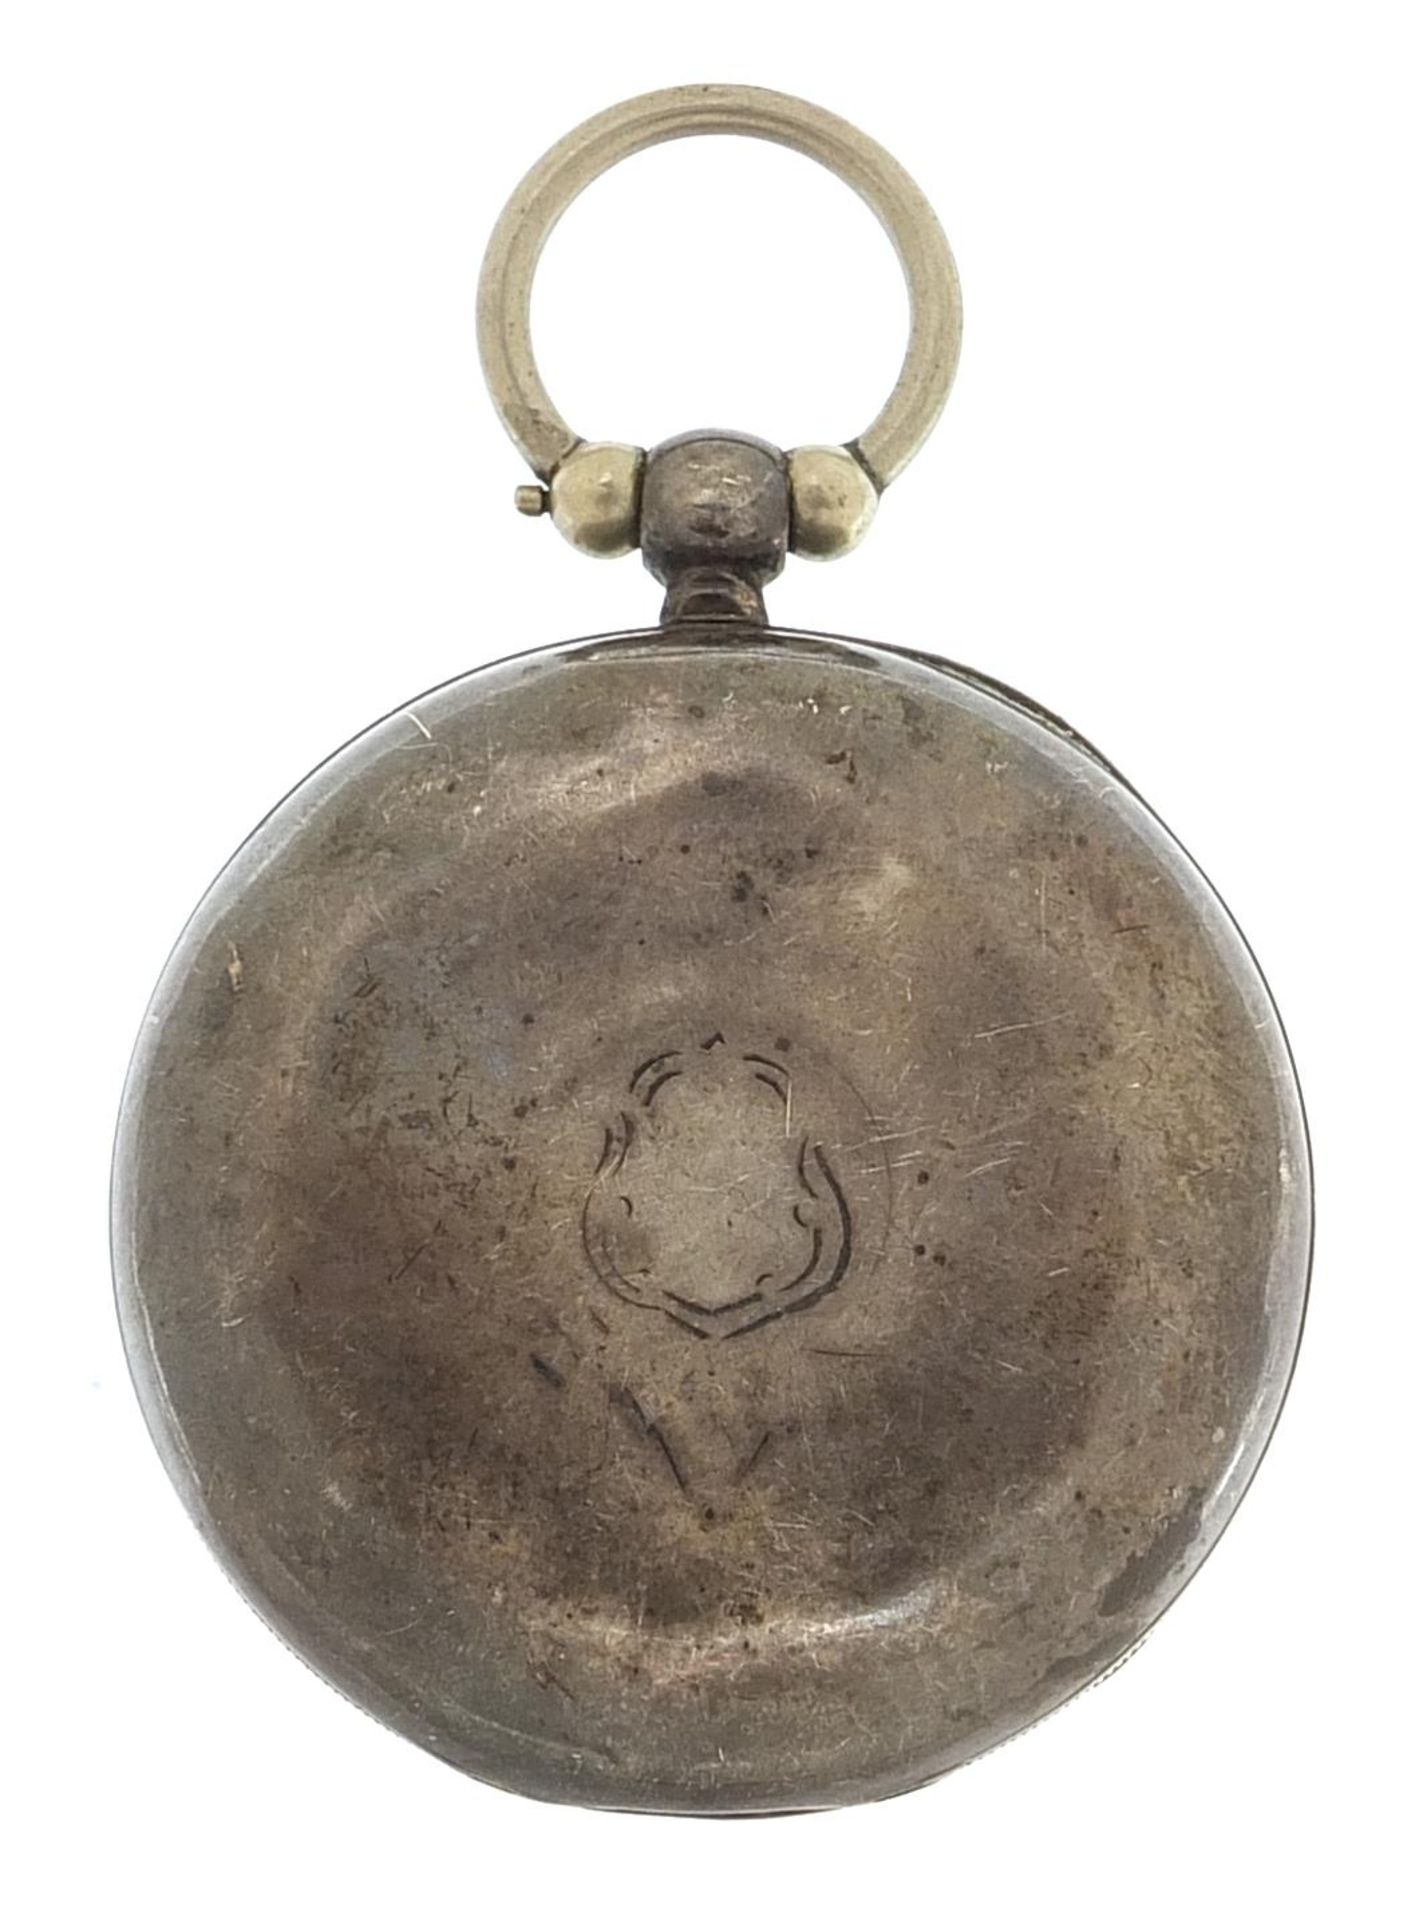 Waltham, gentlemen's silver open face pocket watch with enamelled dial, the movement numbered - Image 2 of 4